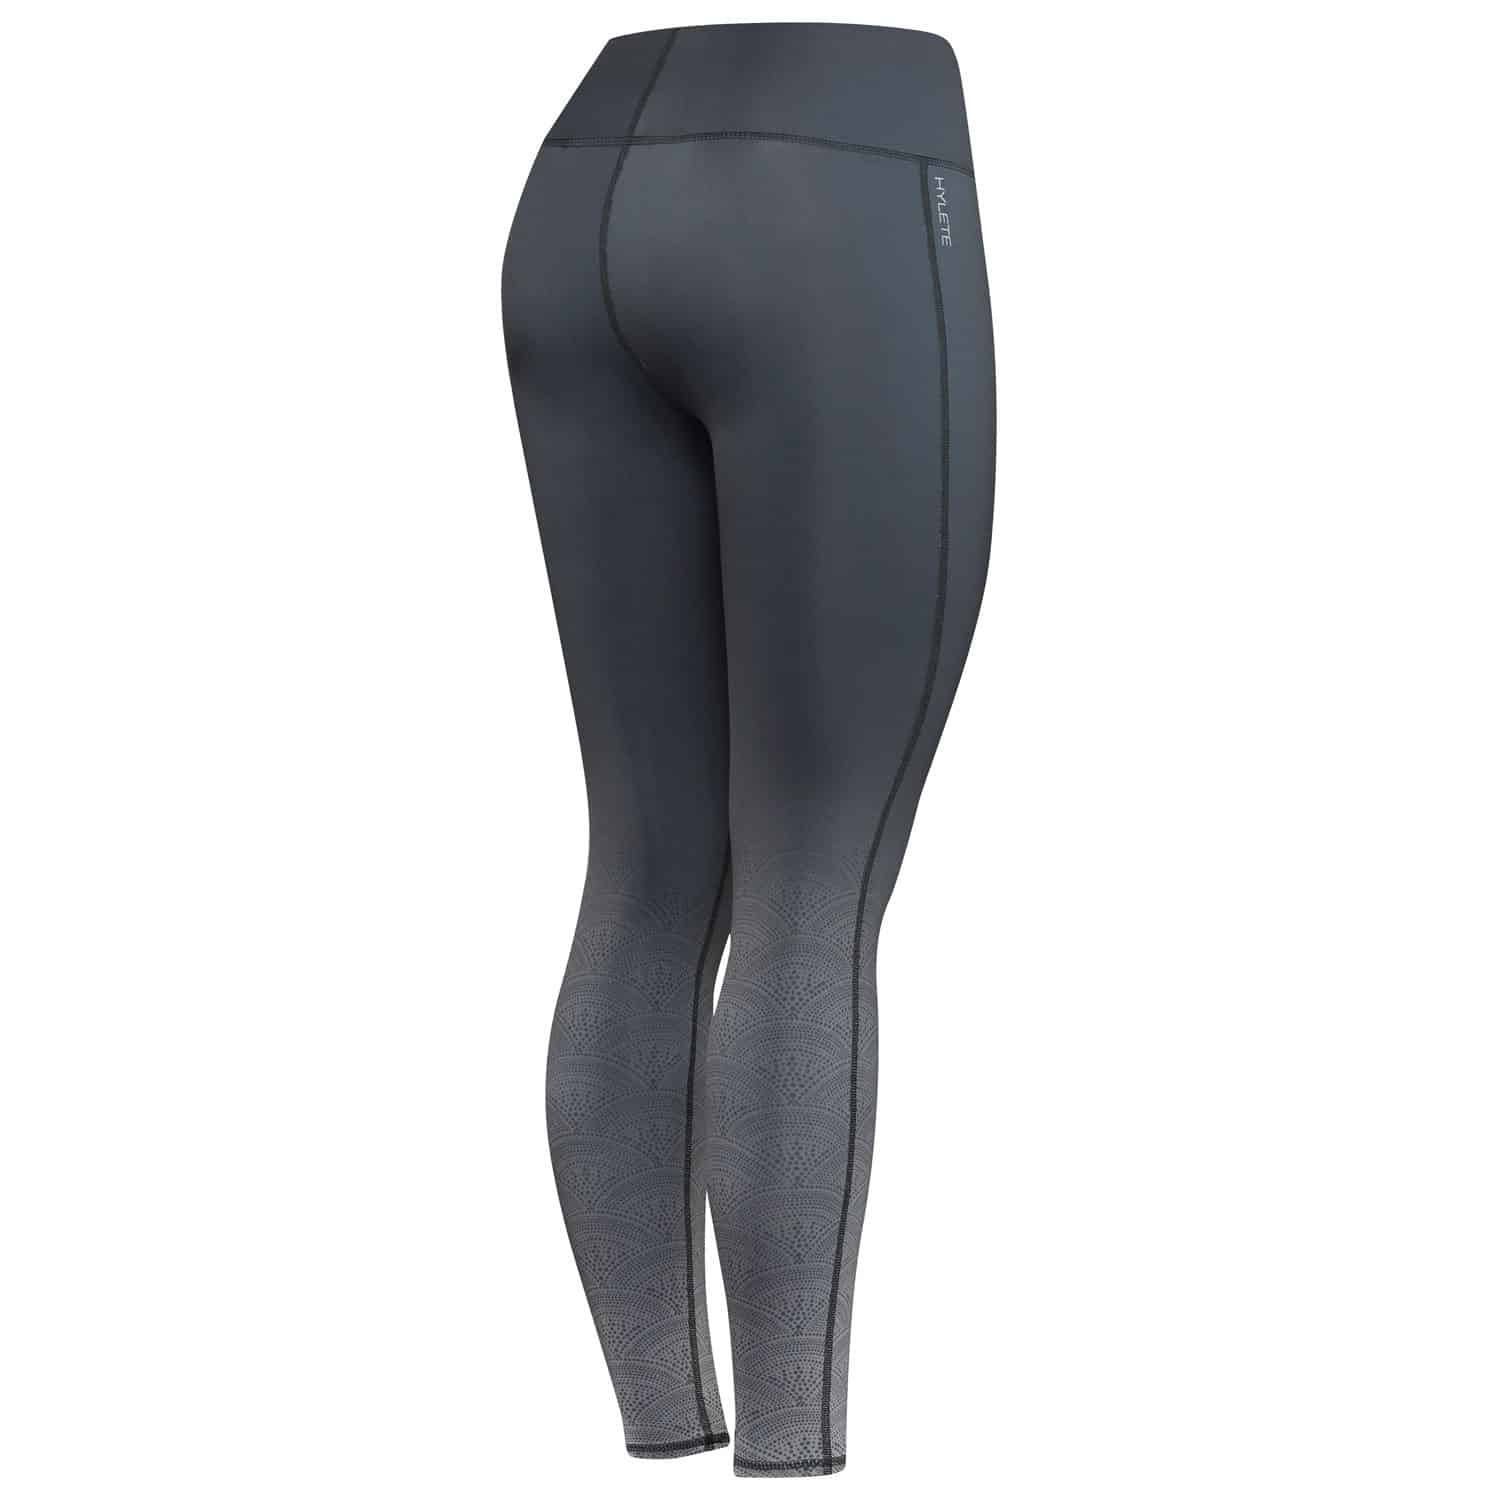 Motiv II Workout Tights for CrossFit from Hylete Review - Cross Train ...